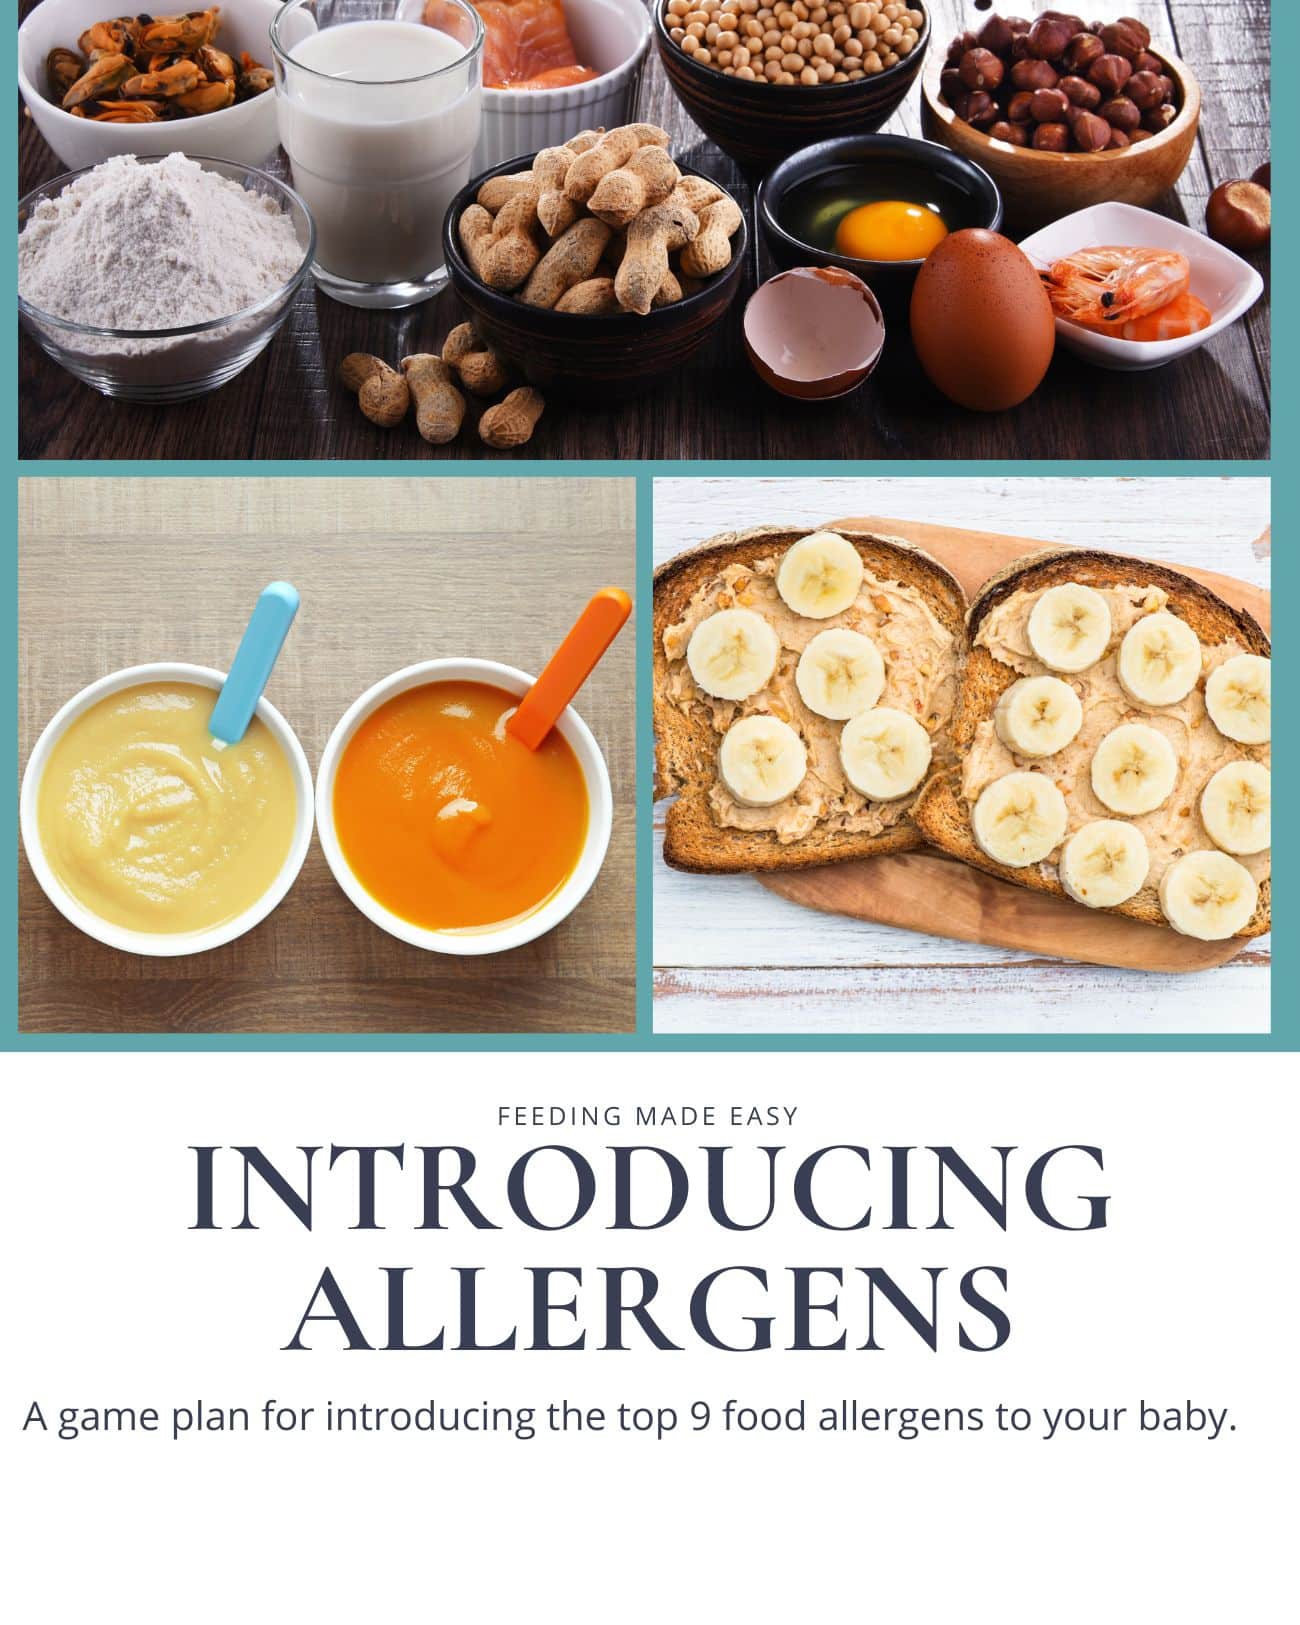 Introducing Allergens Cover with the tagline a game plan for introducing the top 9 allergens to your baby